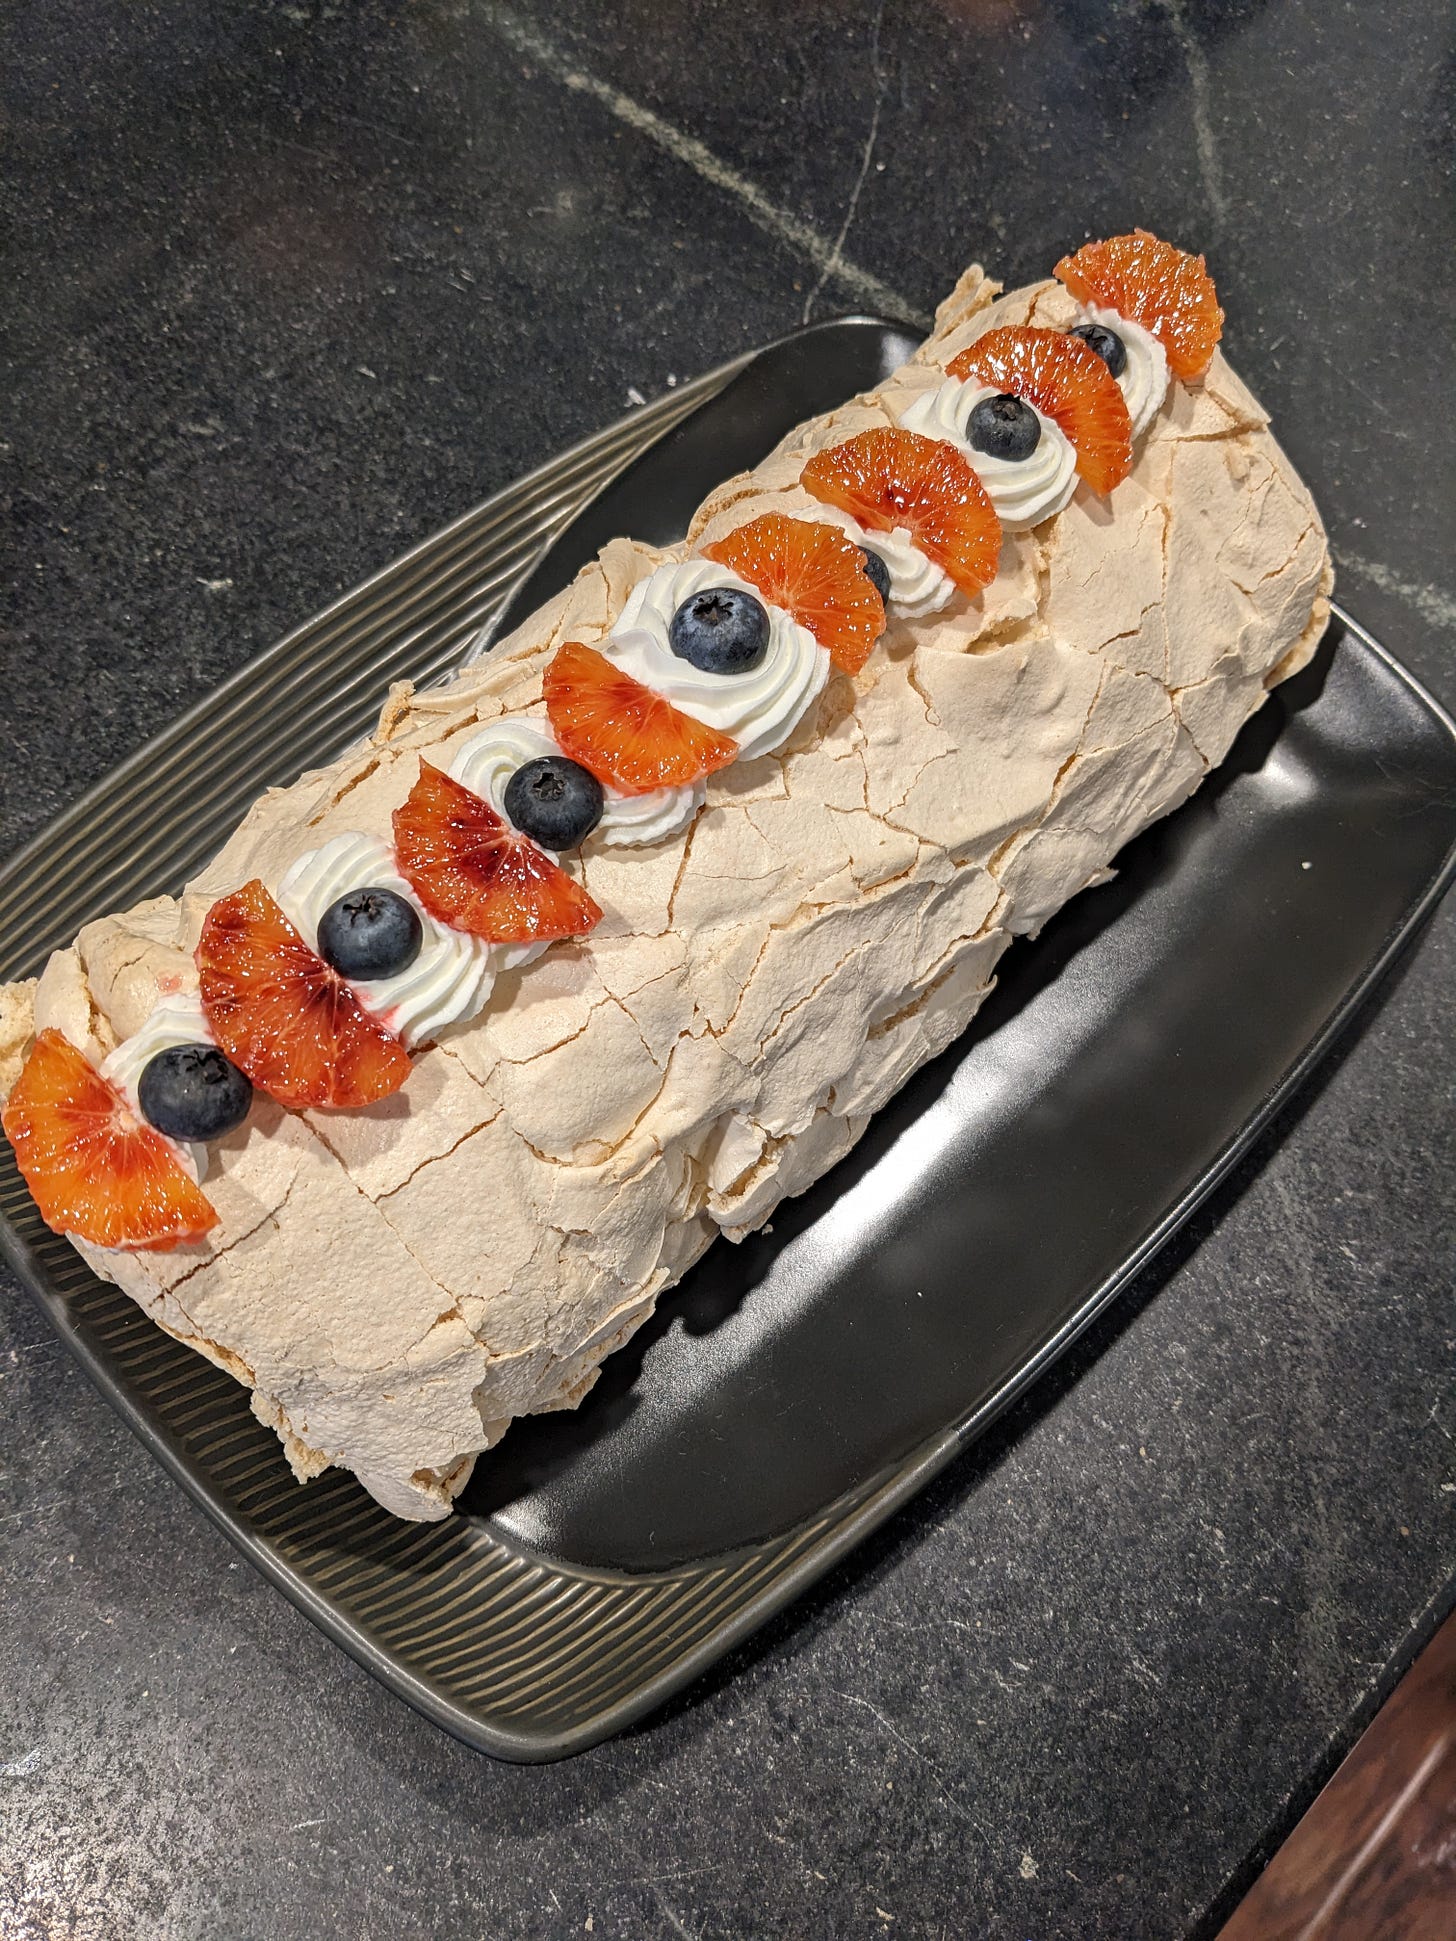 A meringue roulade on a black plate